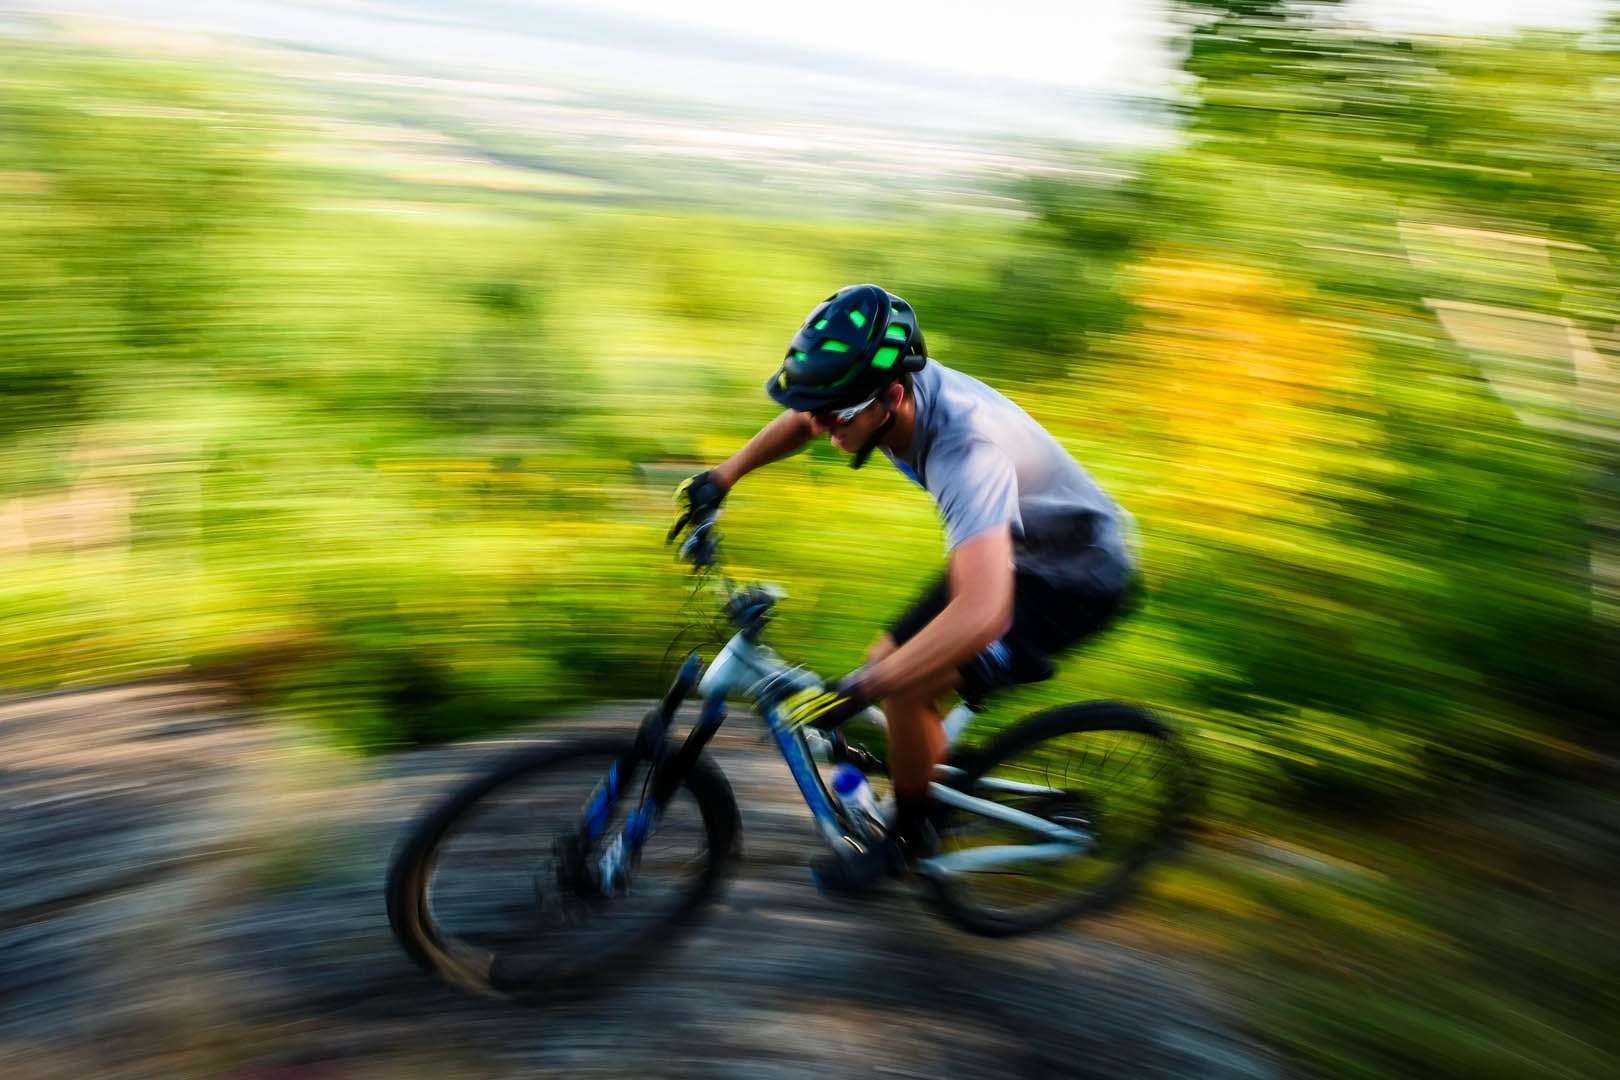 Mountain biker going very fast. The background is a total blur.